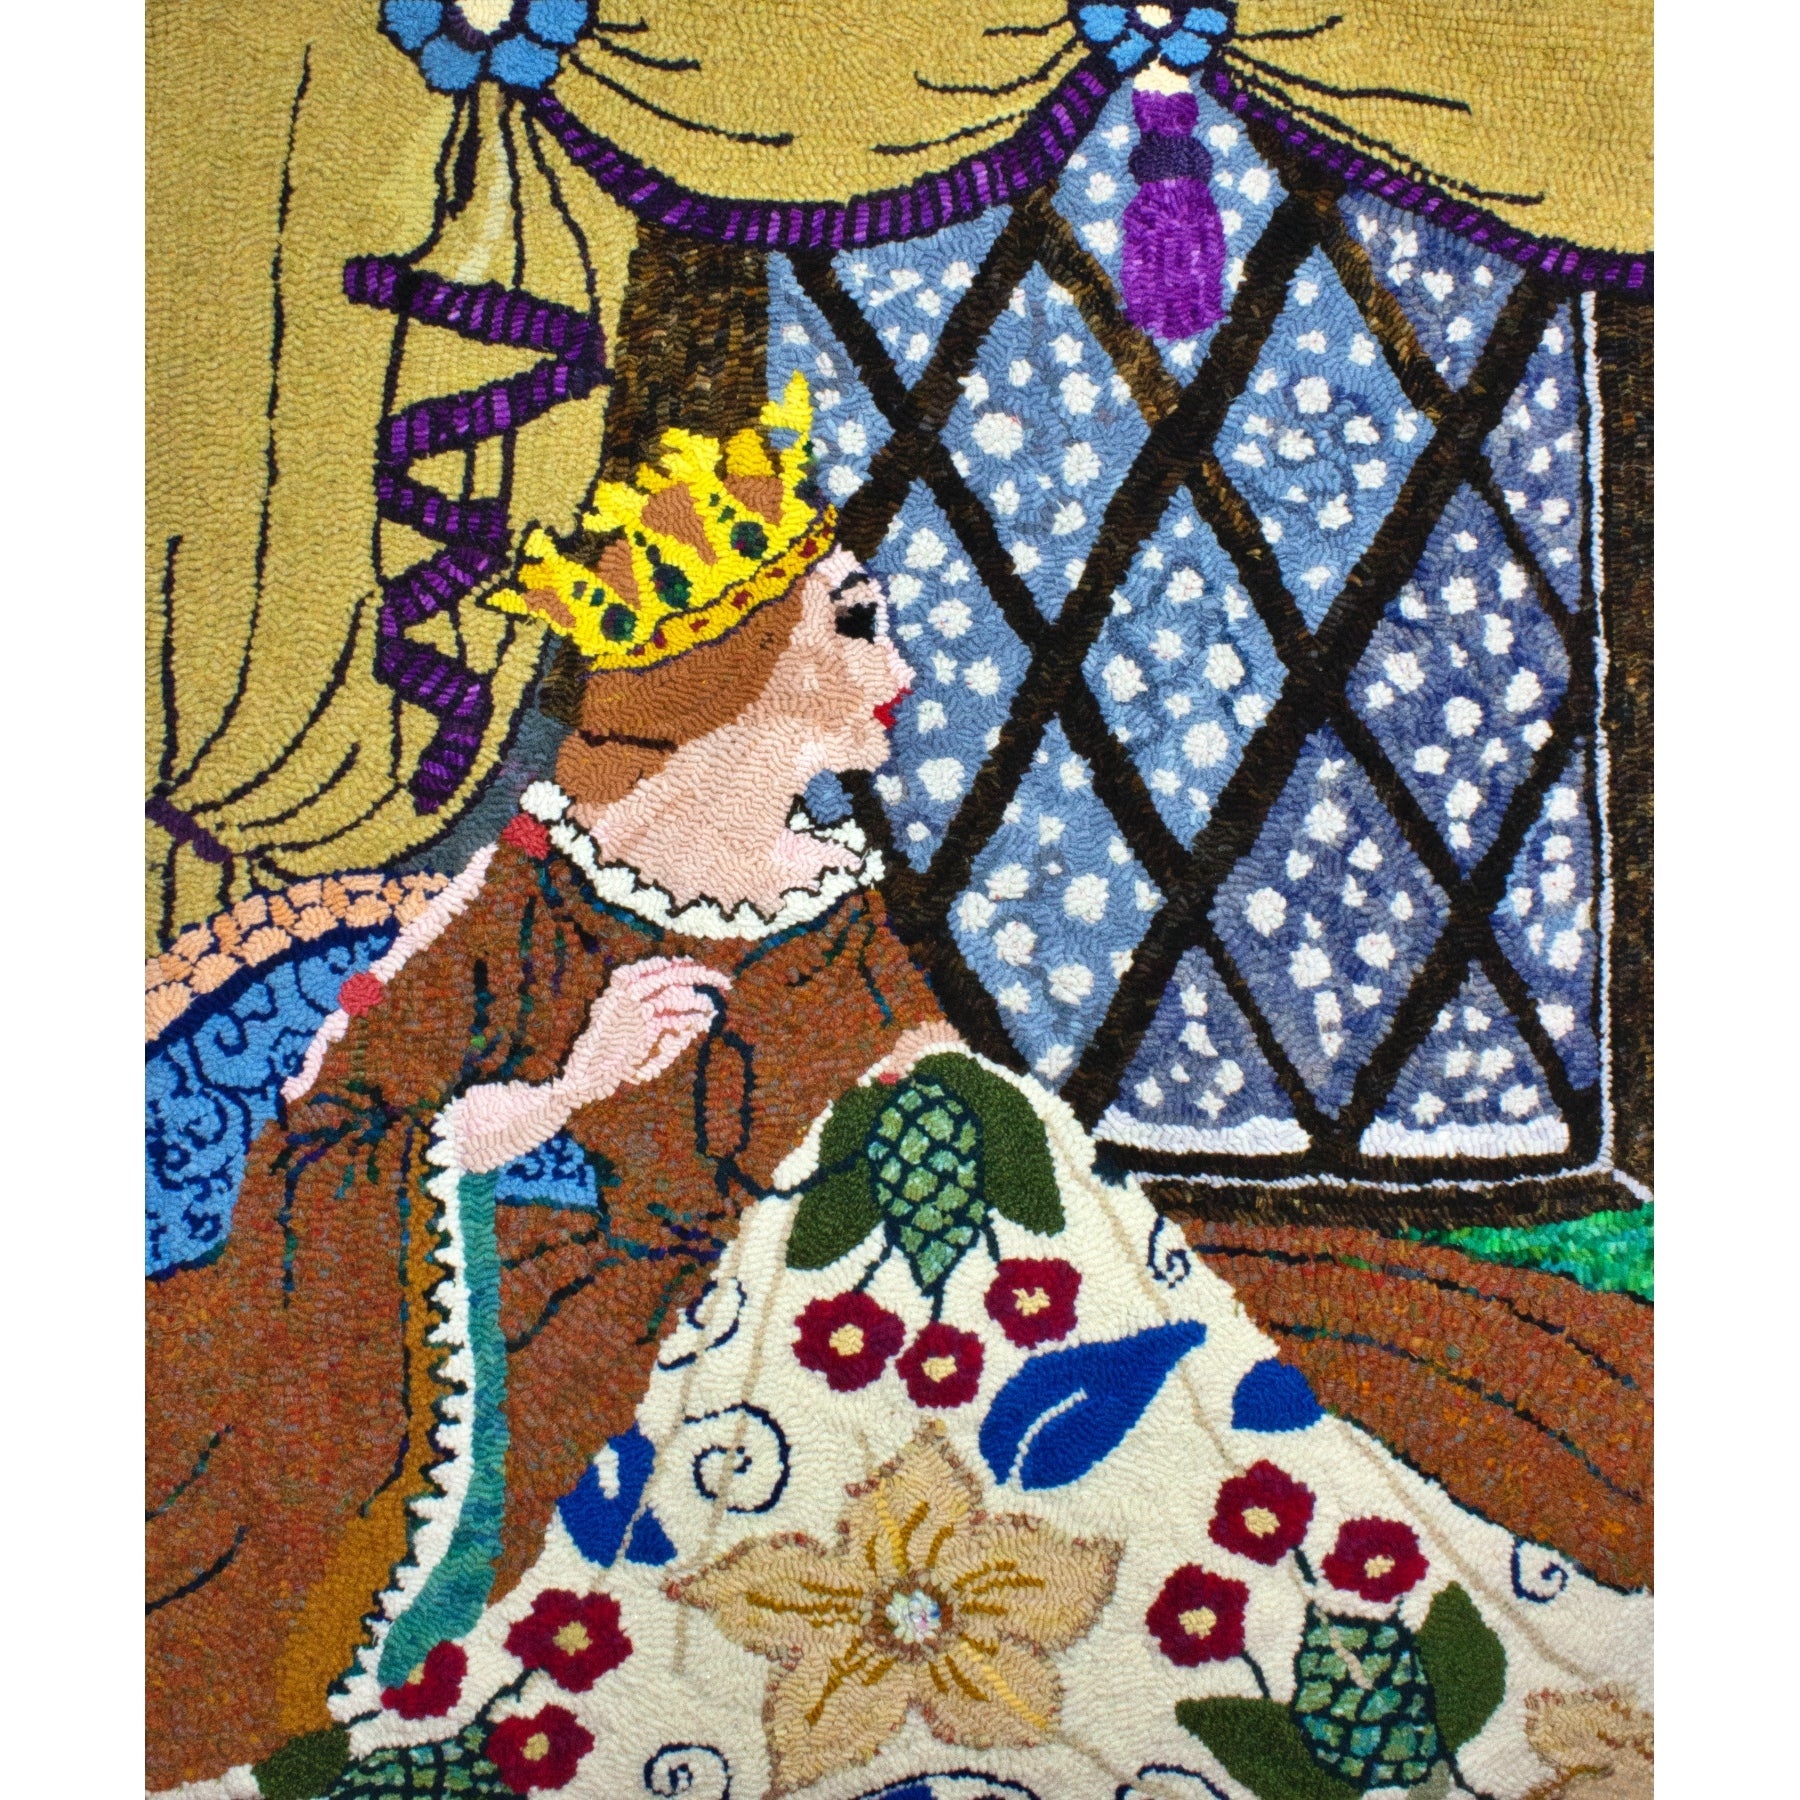 The Queen Wishes for a Baby - Snow White , rug hooked by Vicki Rudolph